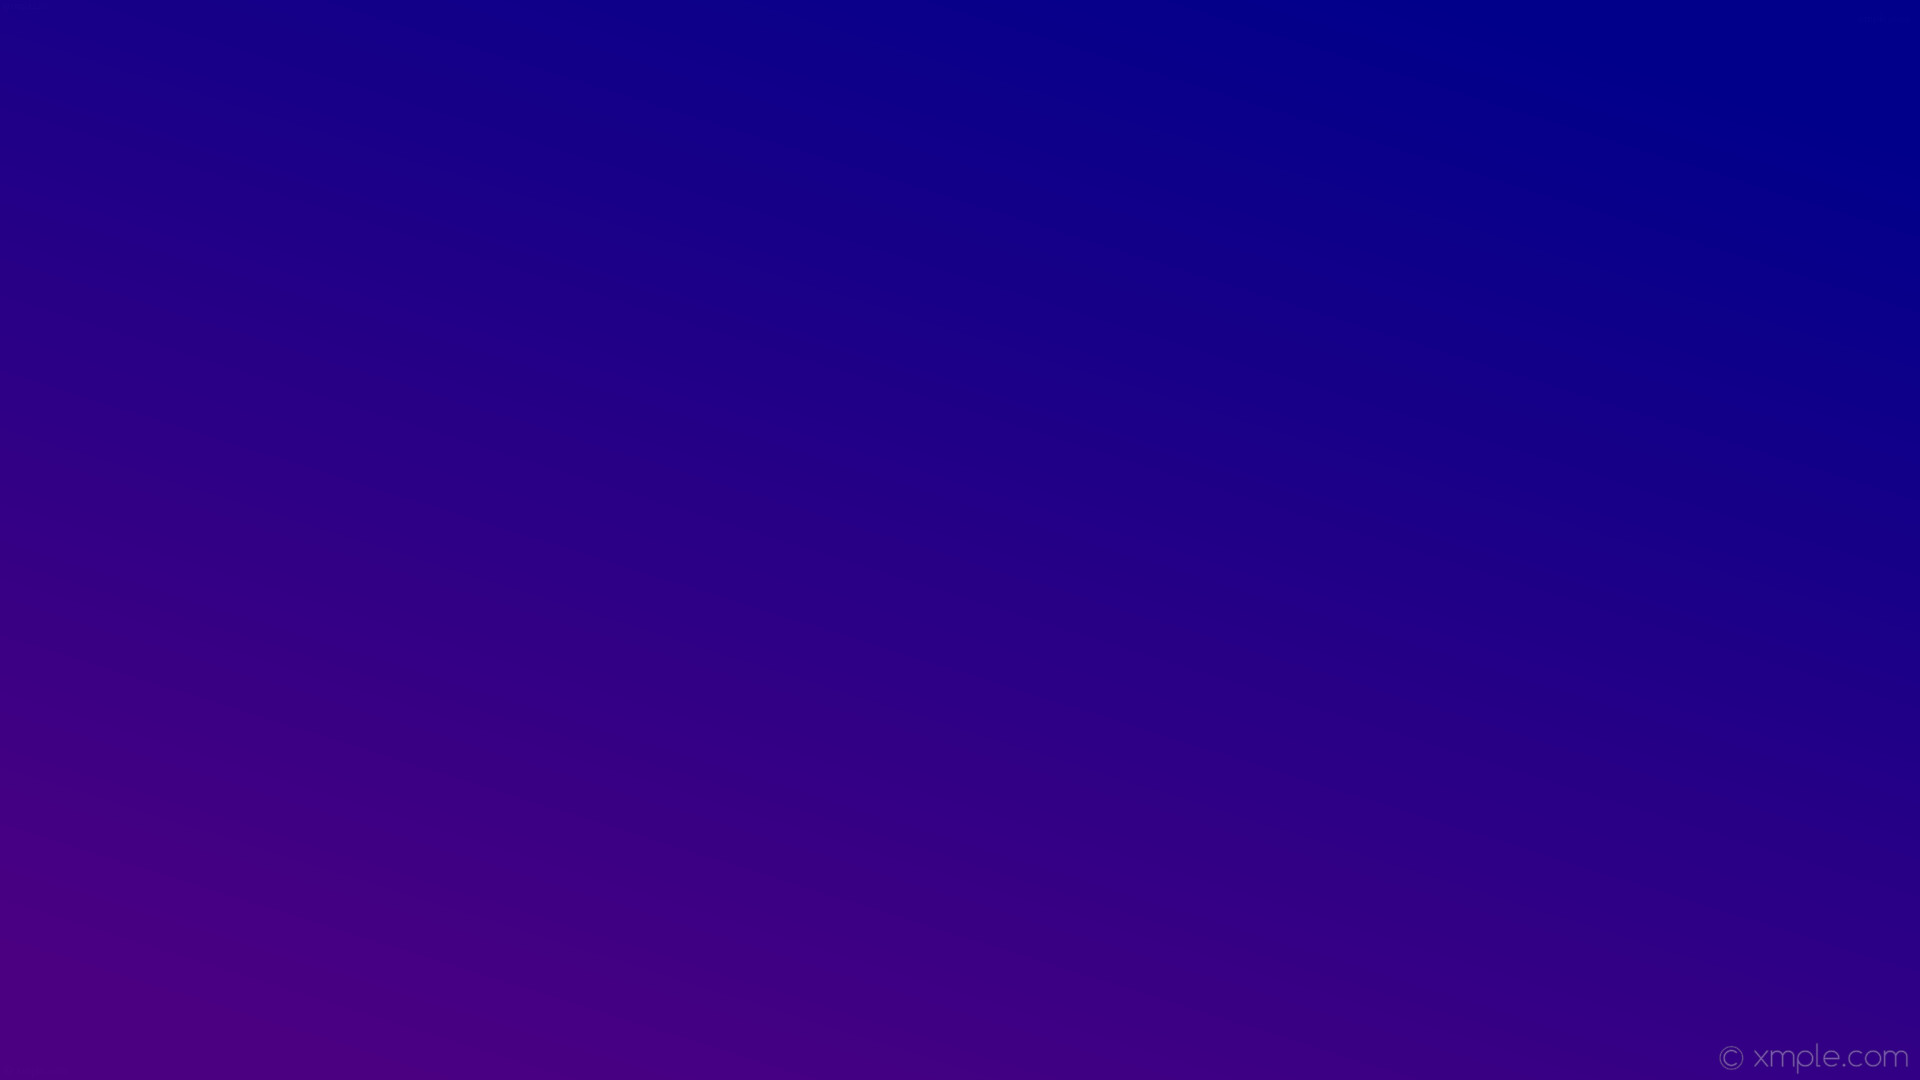 Purple and Blue Wallpaper (77+ images)